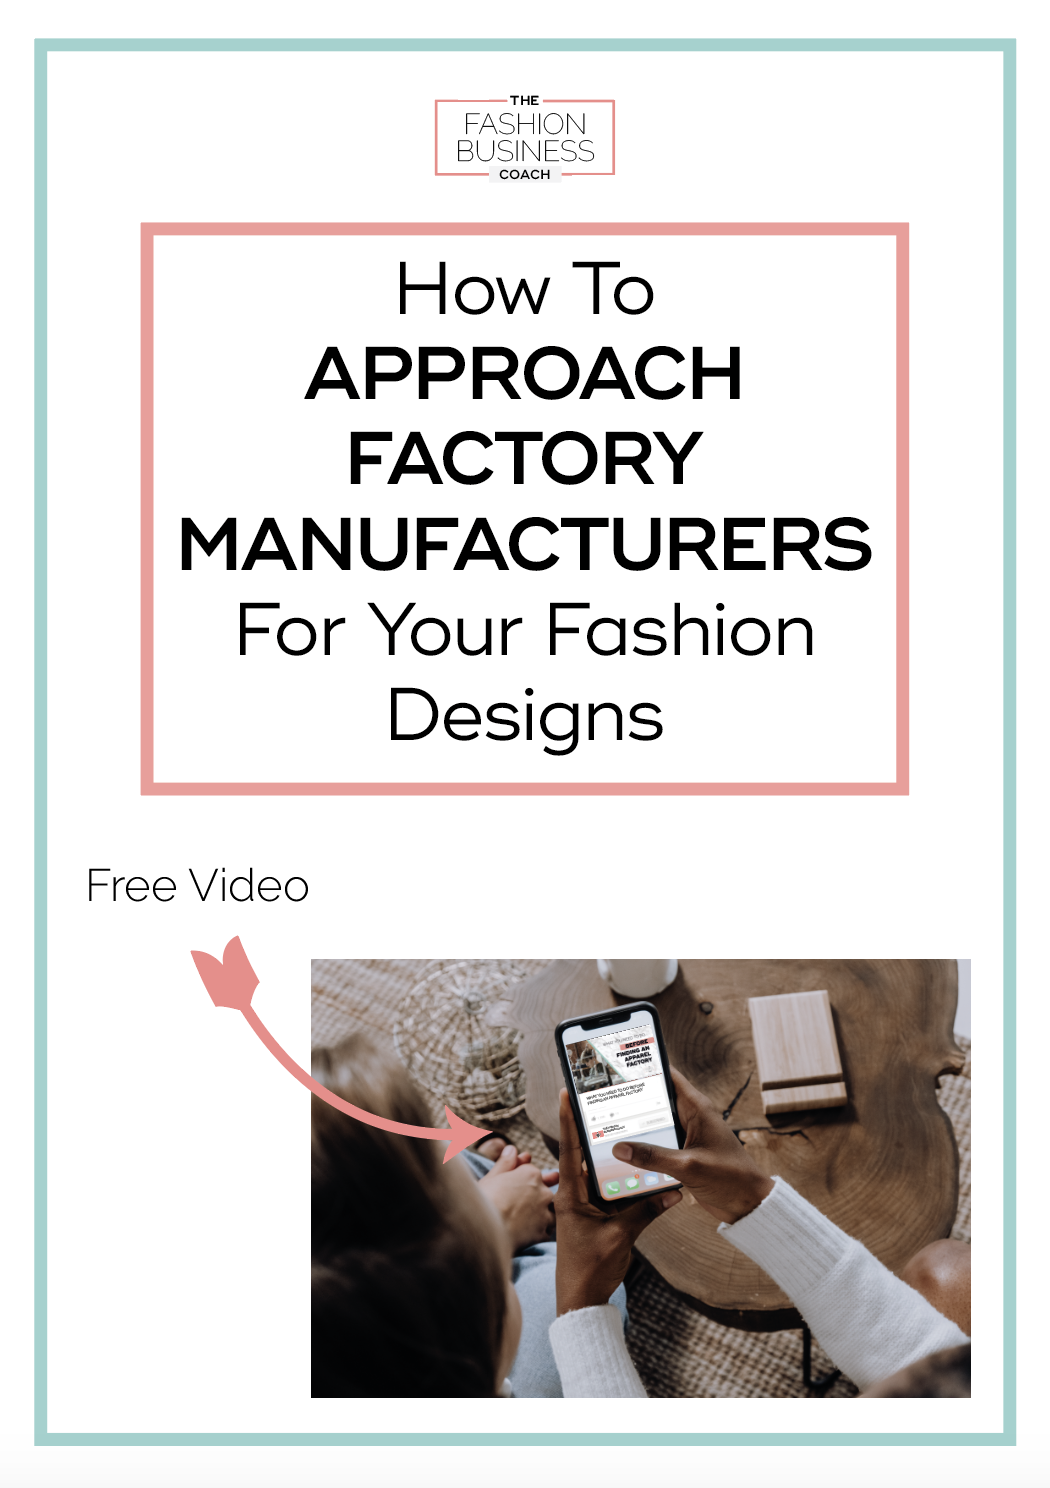 How to Approach Factory Manufacturers for Your Fashion Designs 2.png